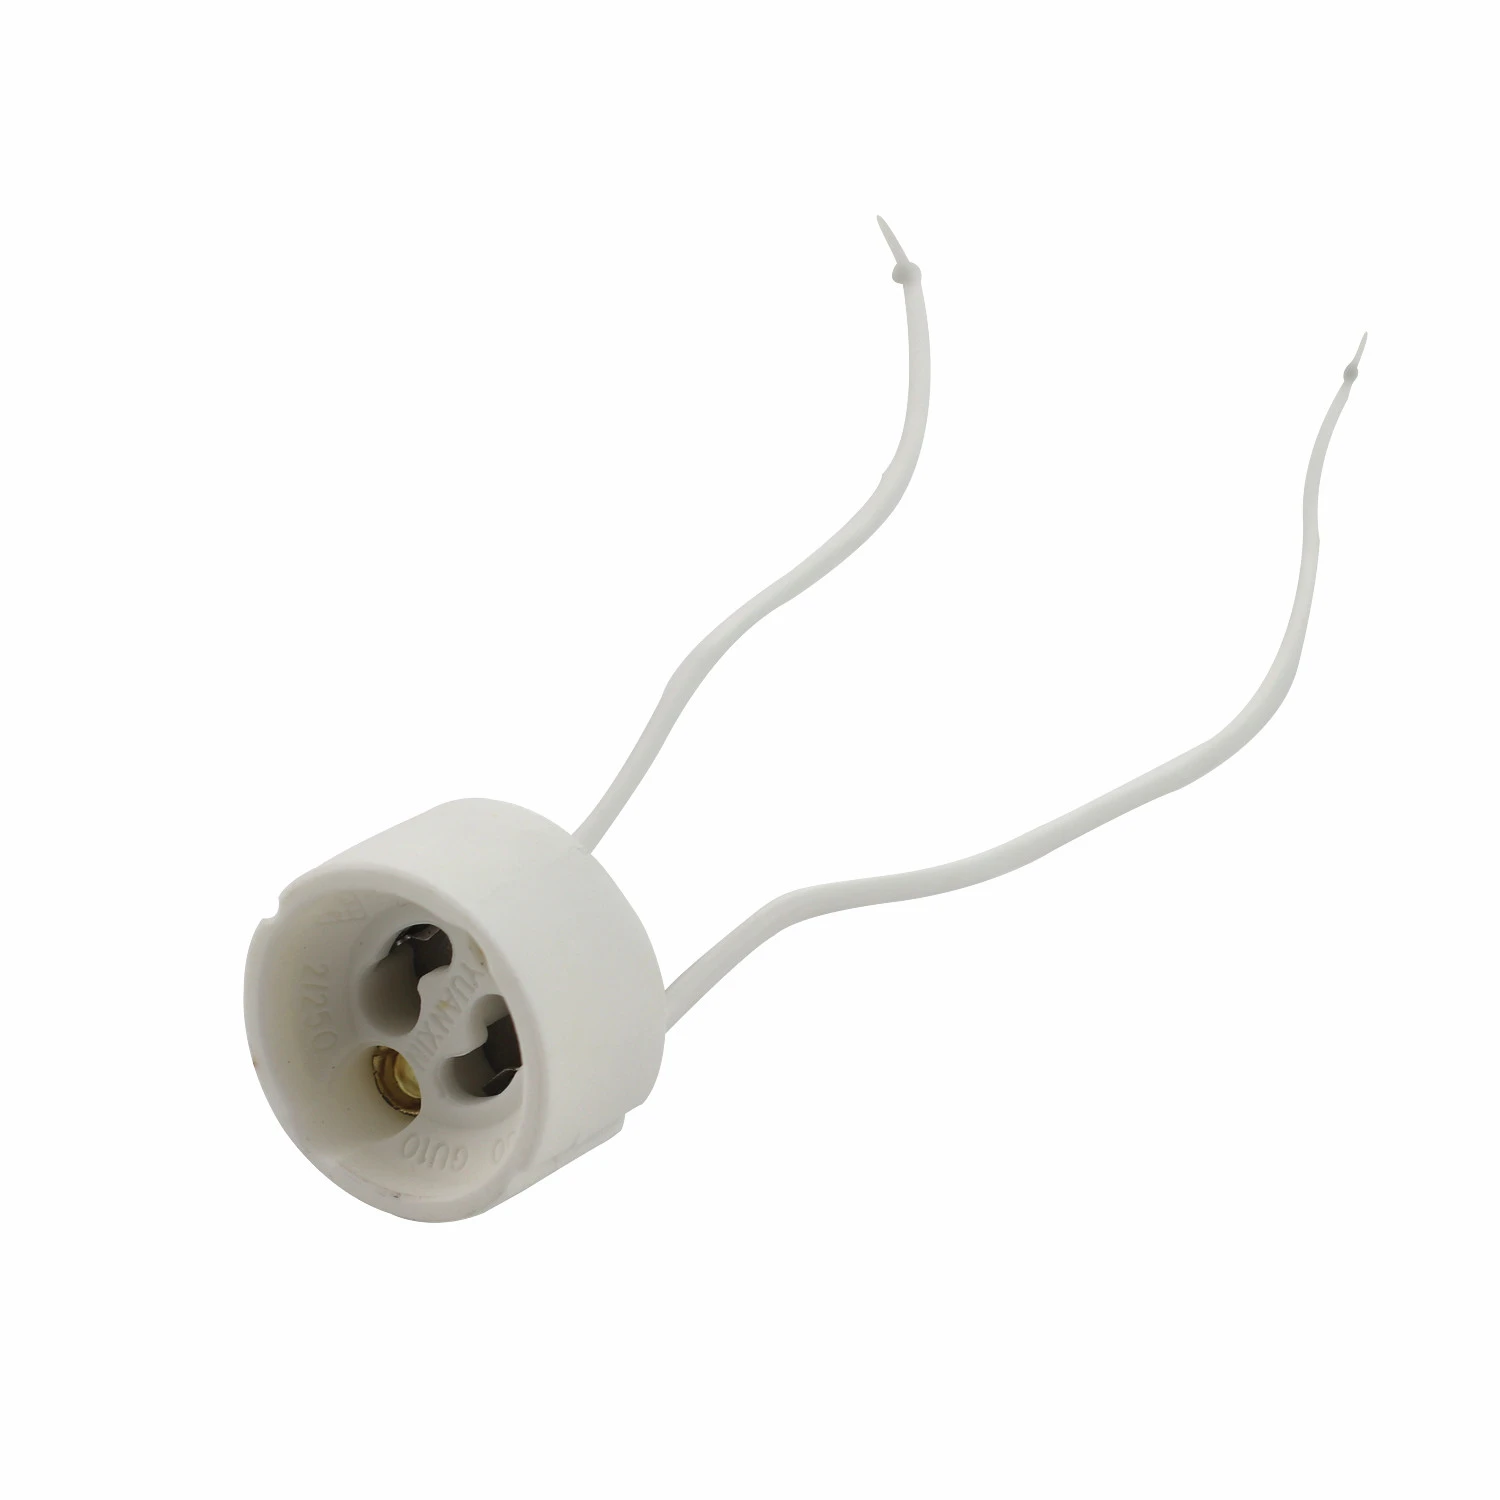 15cm Base GU10 Ceramic Lamp Socket Holder Connecter Lampholder With Wire Can Customize Length